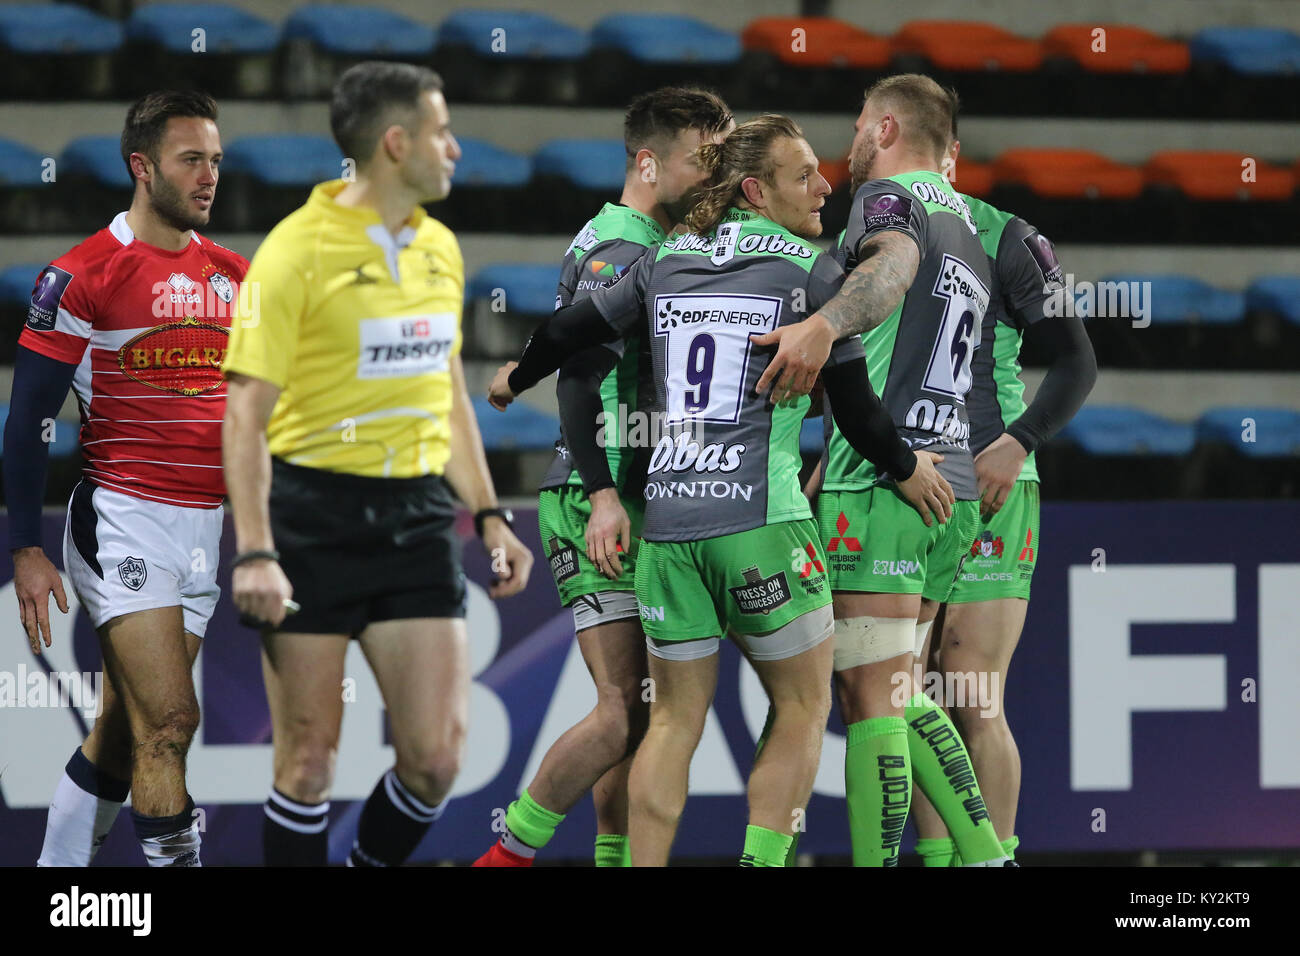 Agen, France. 12th Jan, 2018. Joy of gloucester team after try during the match opposing Agen vs Gloucester in EPCR Challenge Cup 2017/2018. Credit: Sebastien Lapeyrere/Alamy Live News. Stock Photo